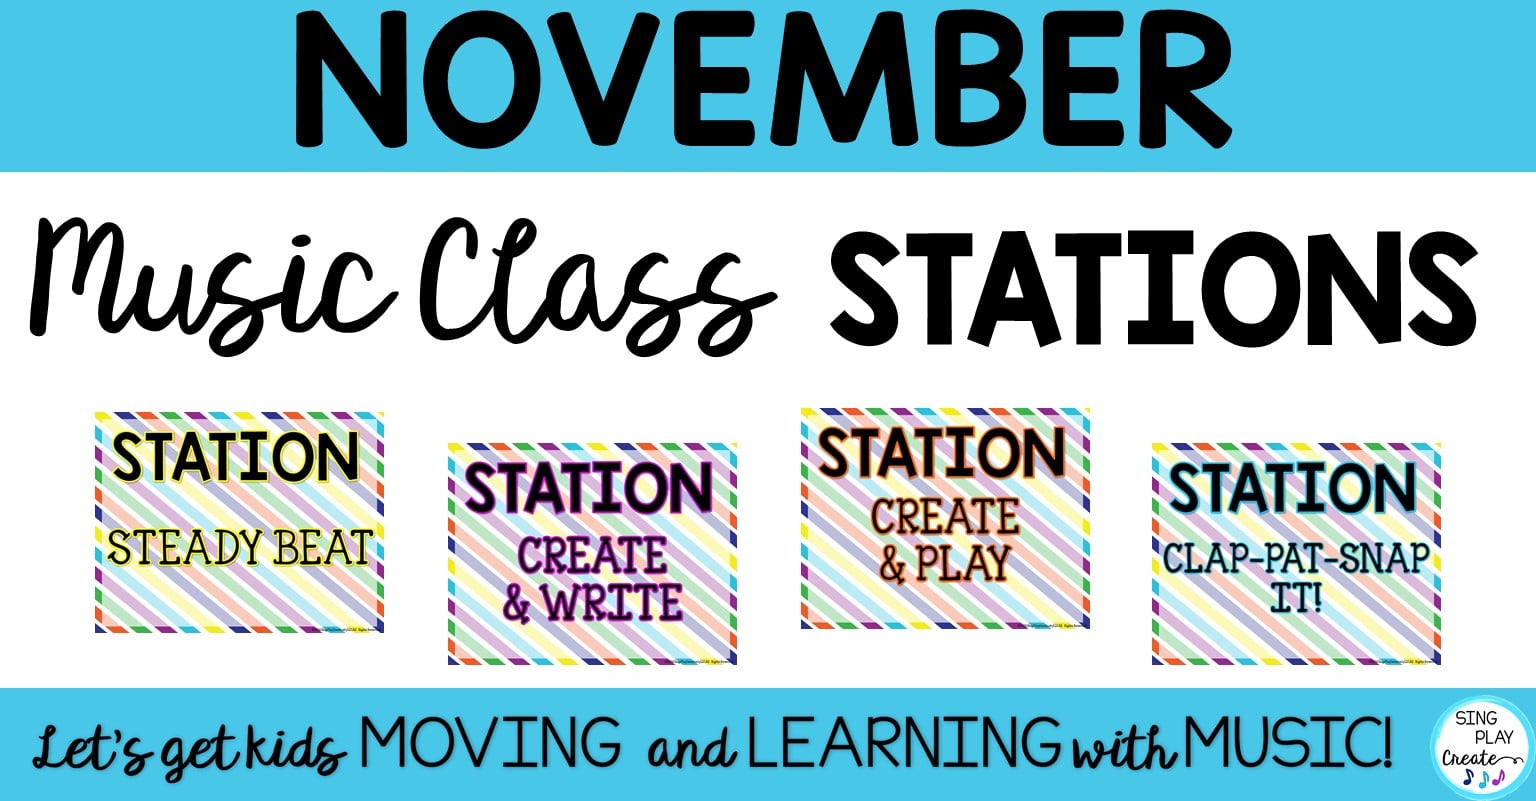 You are currently viewing November Music Class Stations